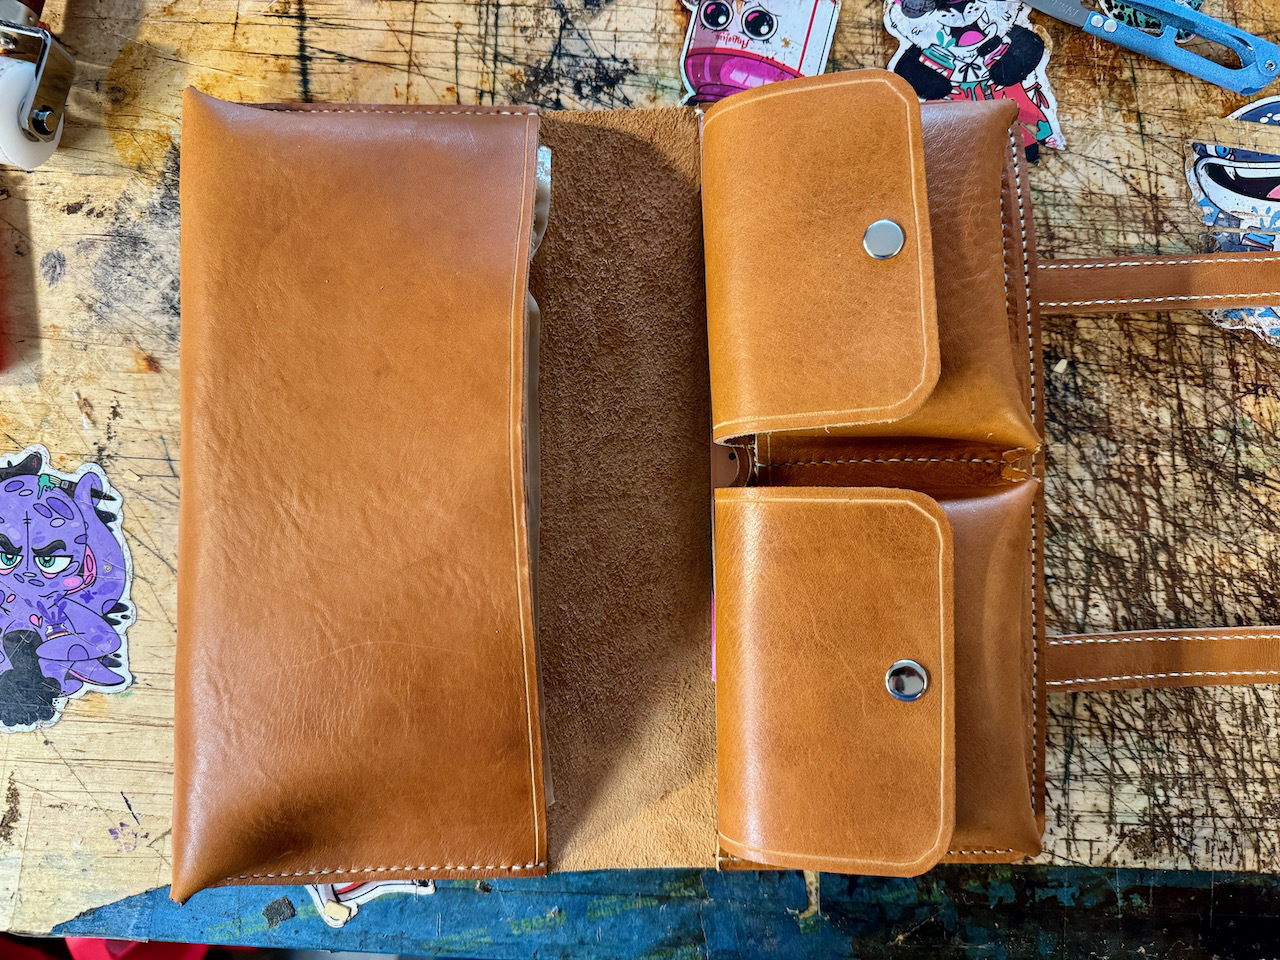 Leather cigar case shown from the top looking down. Main cigar pocket on the right, accessory pockets on the left.